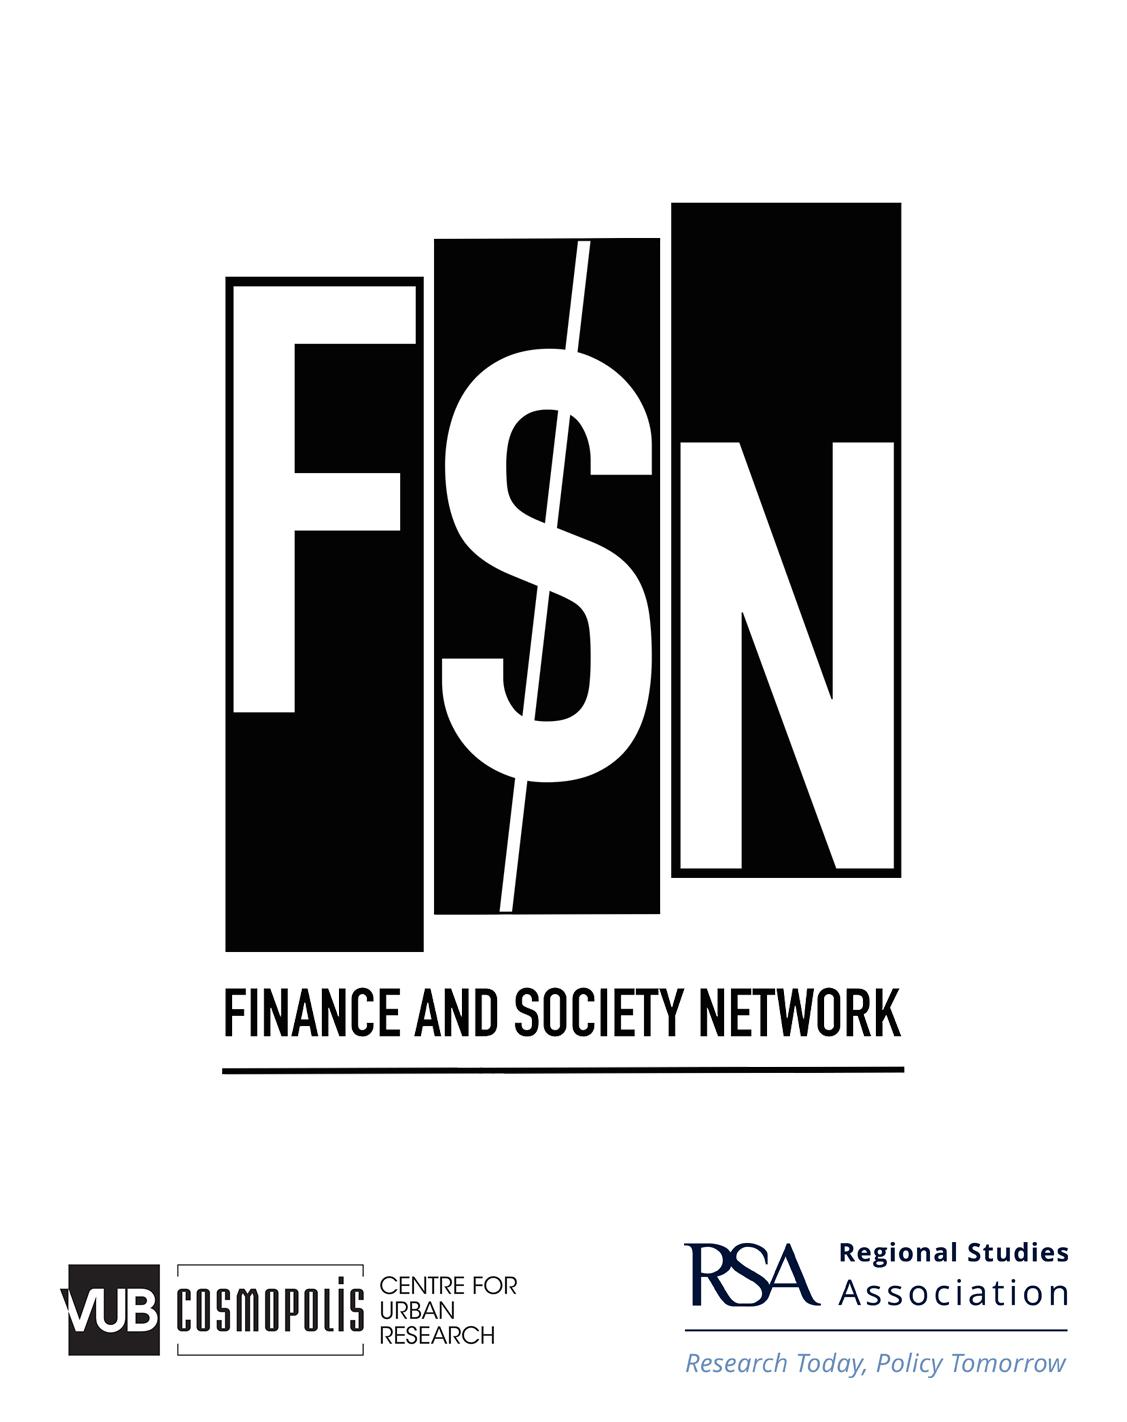 Finance and society network